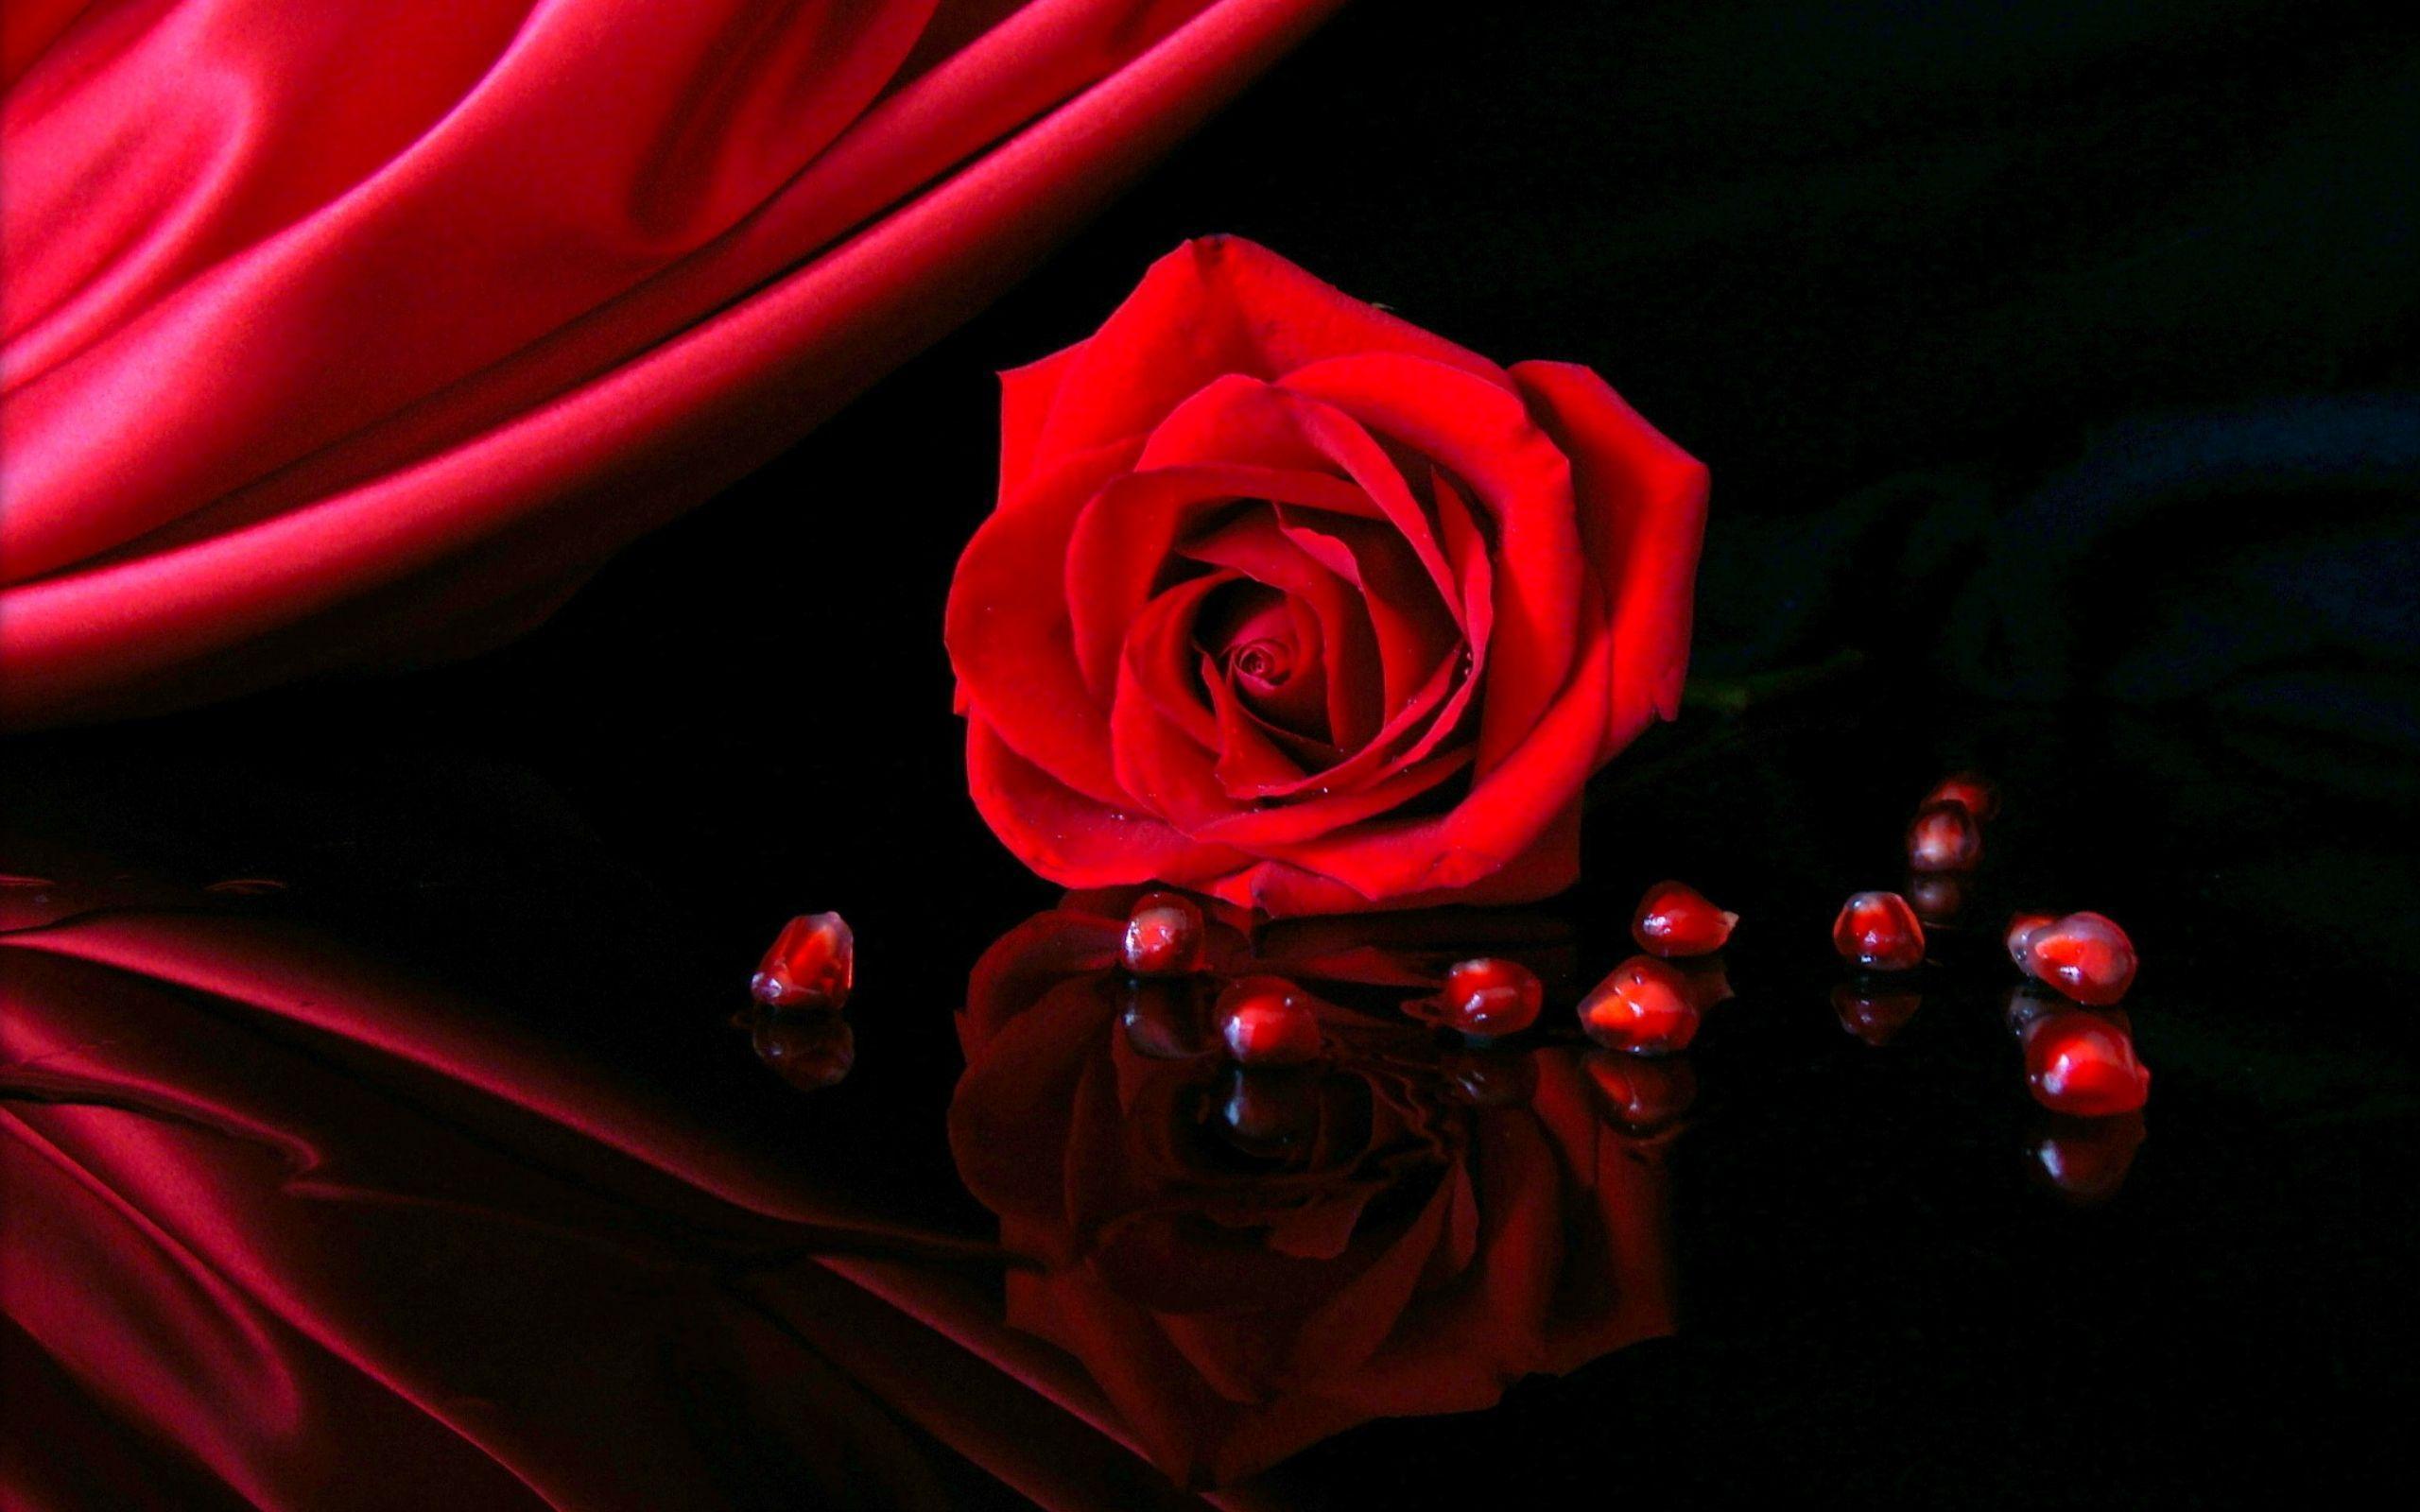 Red Rose with Black Background HD Wallpaper